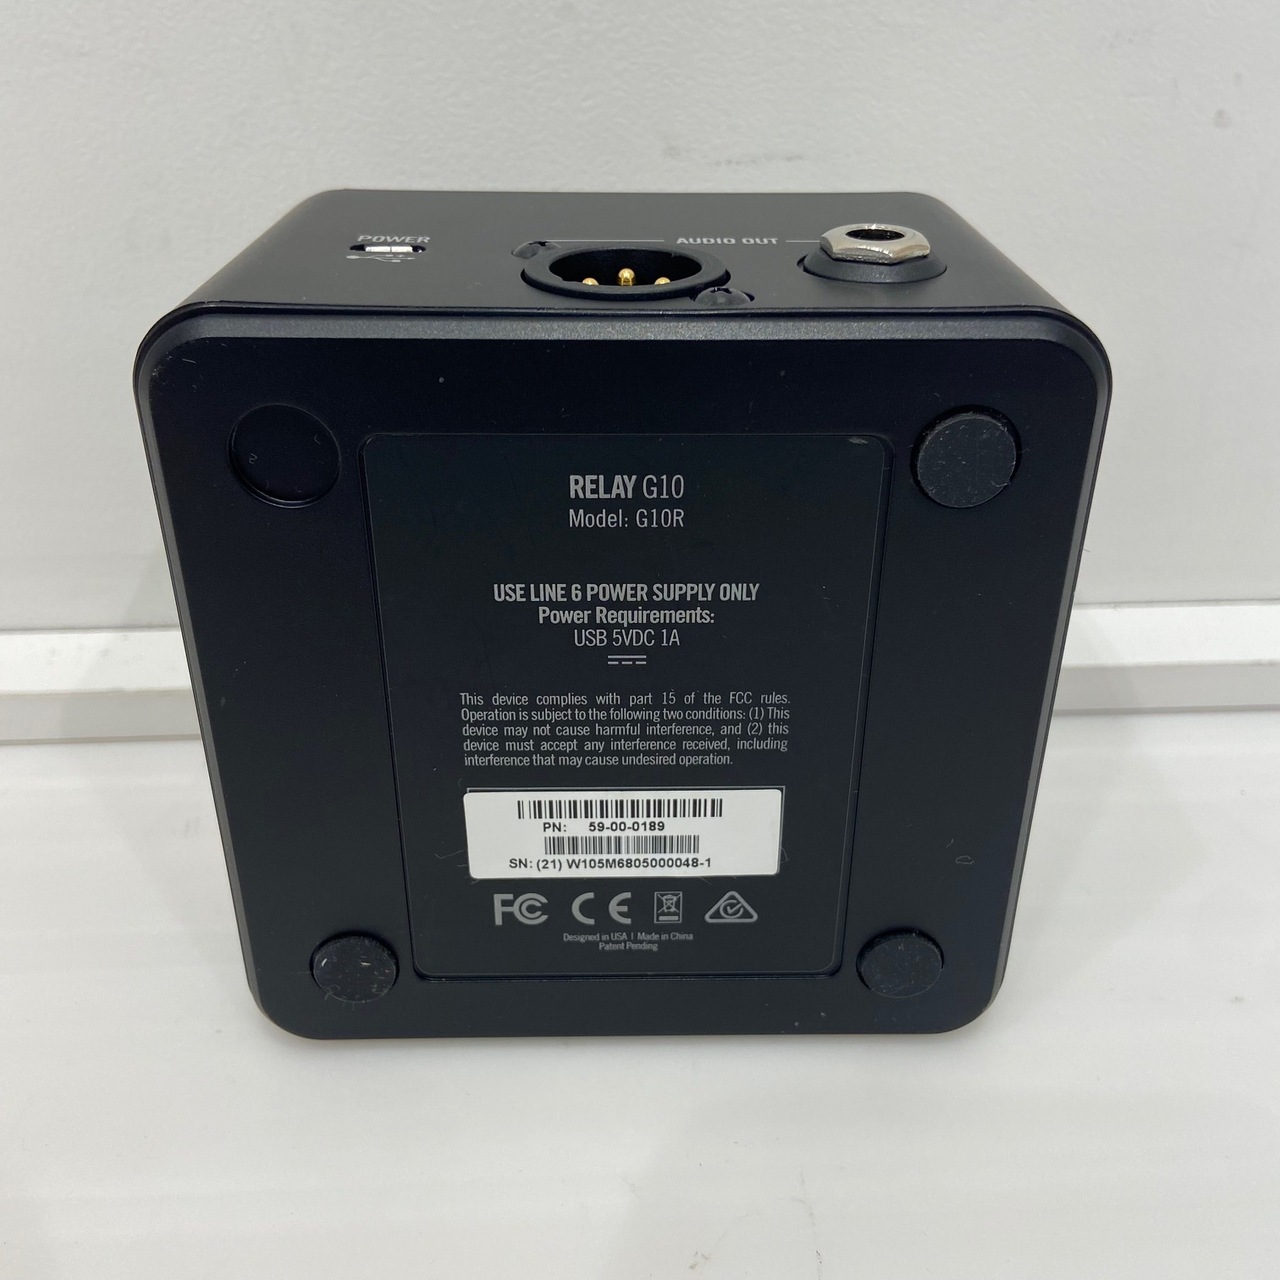 LINE 6 Relay G10 ギターワイヤレスシステム（中古/送料無料）【楽器